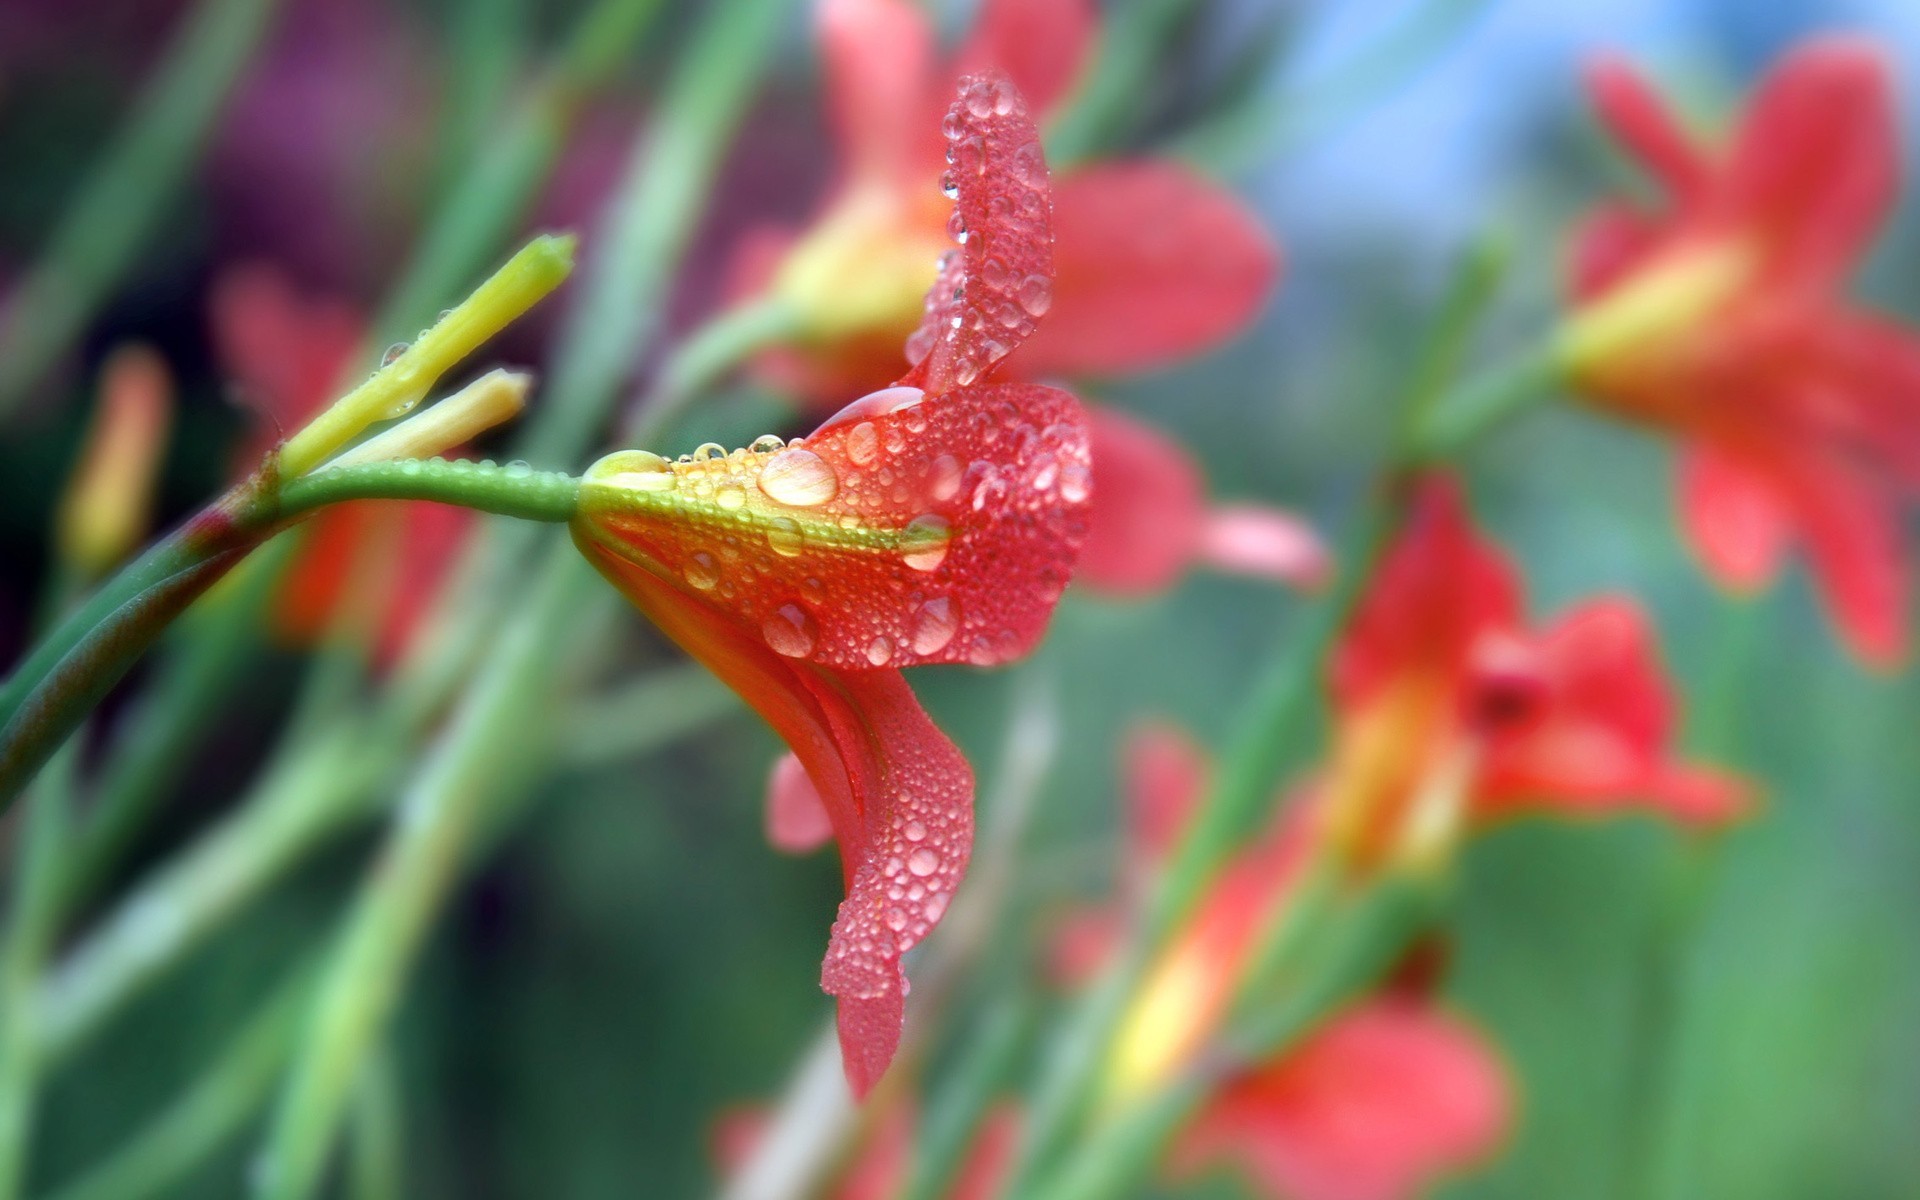 General 1920x1200 nature flowers water drops macro red flowers plants vibrant